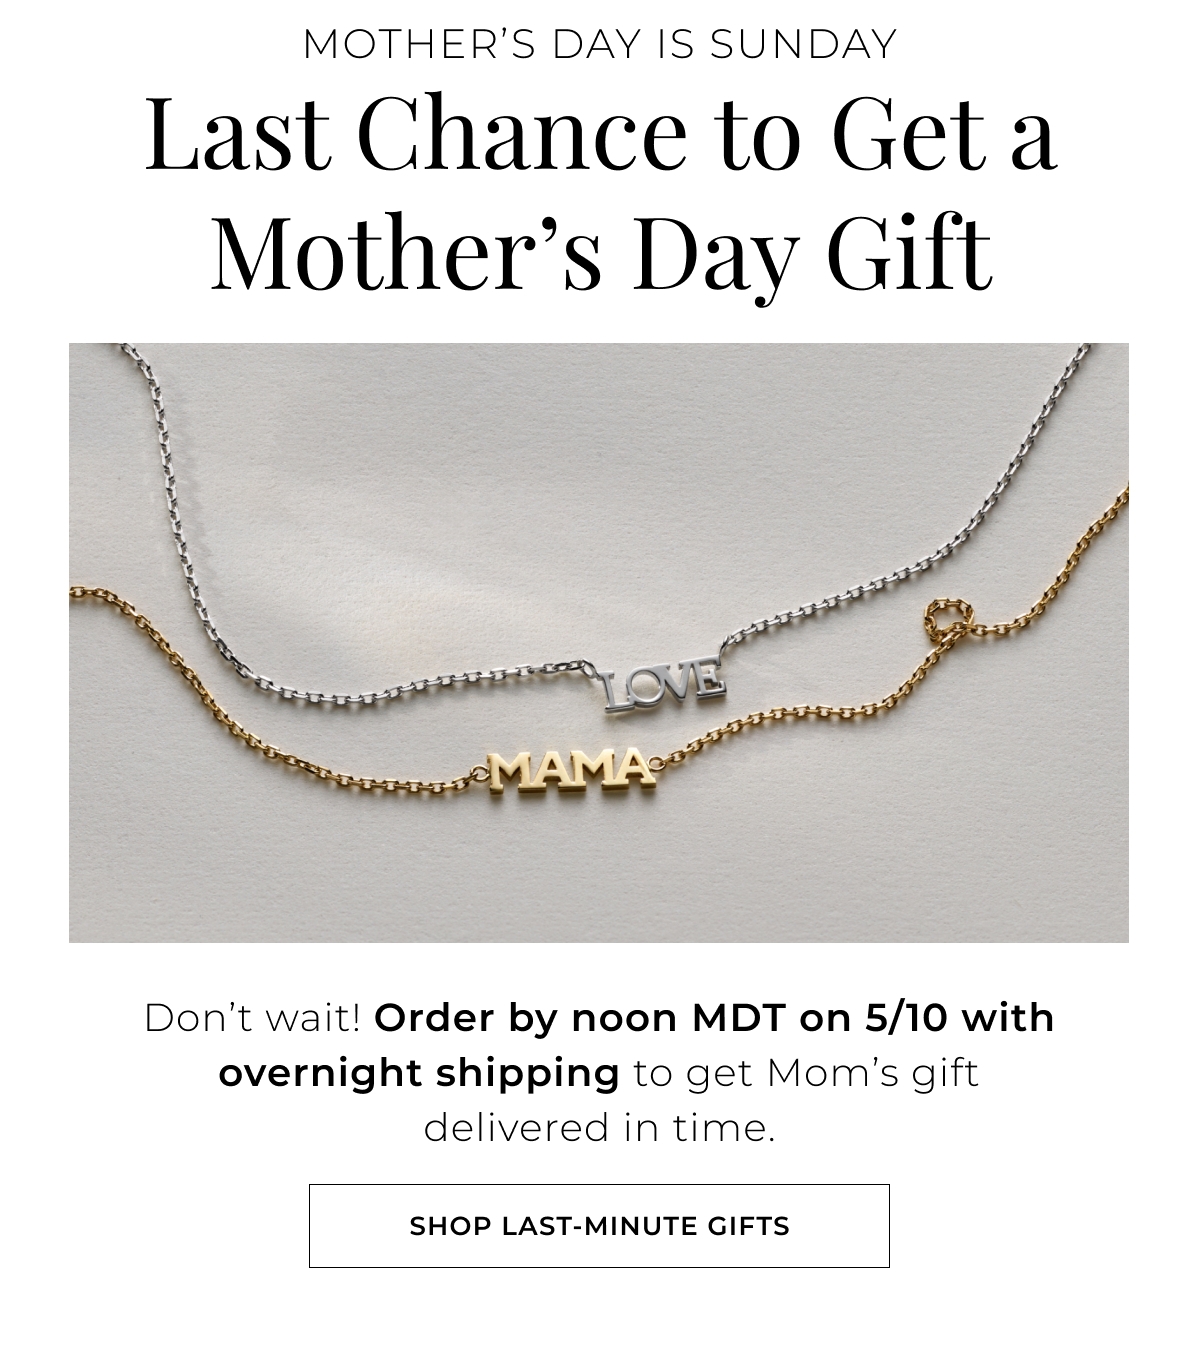 Mothers Day Is Sunday - Last Chance to Get a Mothers Day Gift - Dont wait! Order by noon MDT on 5/10 with overnight shipping to get Moms gift delivered in time. Shop Last-Minute Gifts >